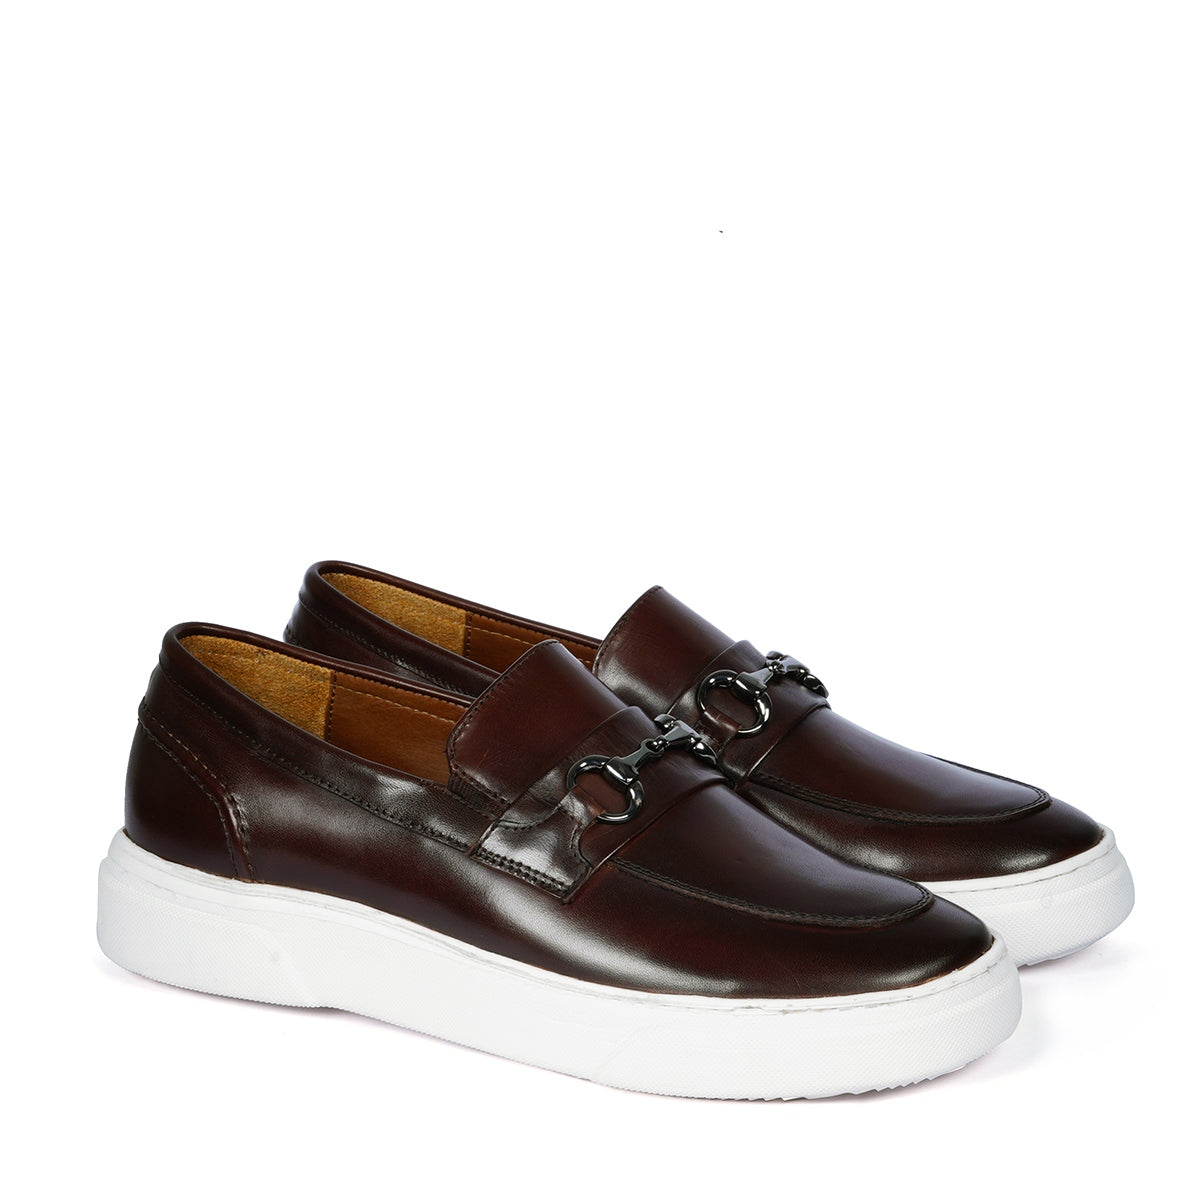 Horse-bit Buckled Slip-On Sneakers in Dark Brown Leather With White Sole